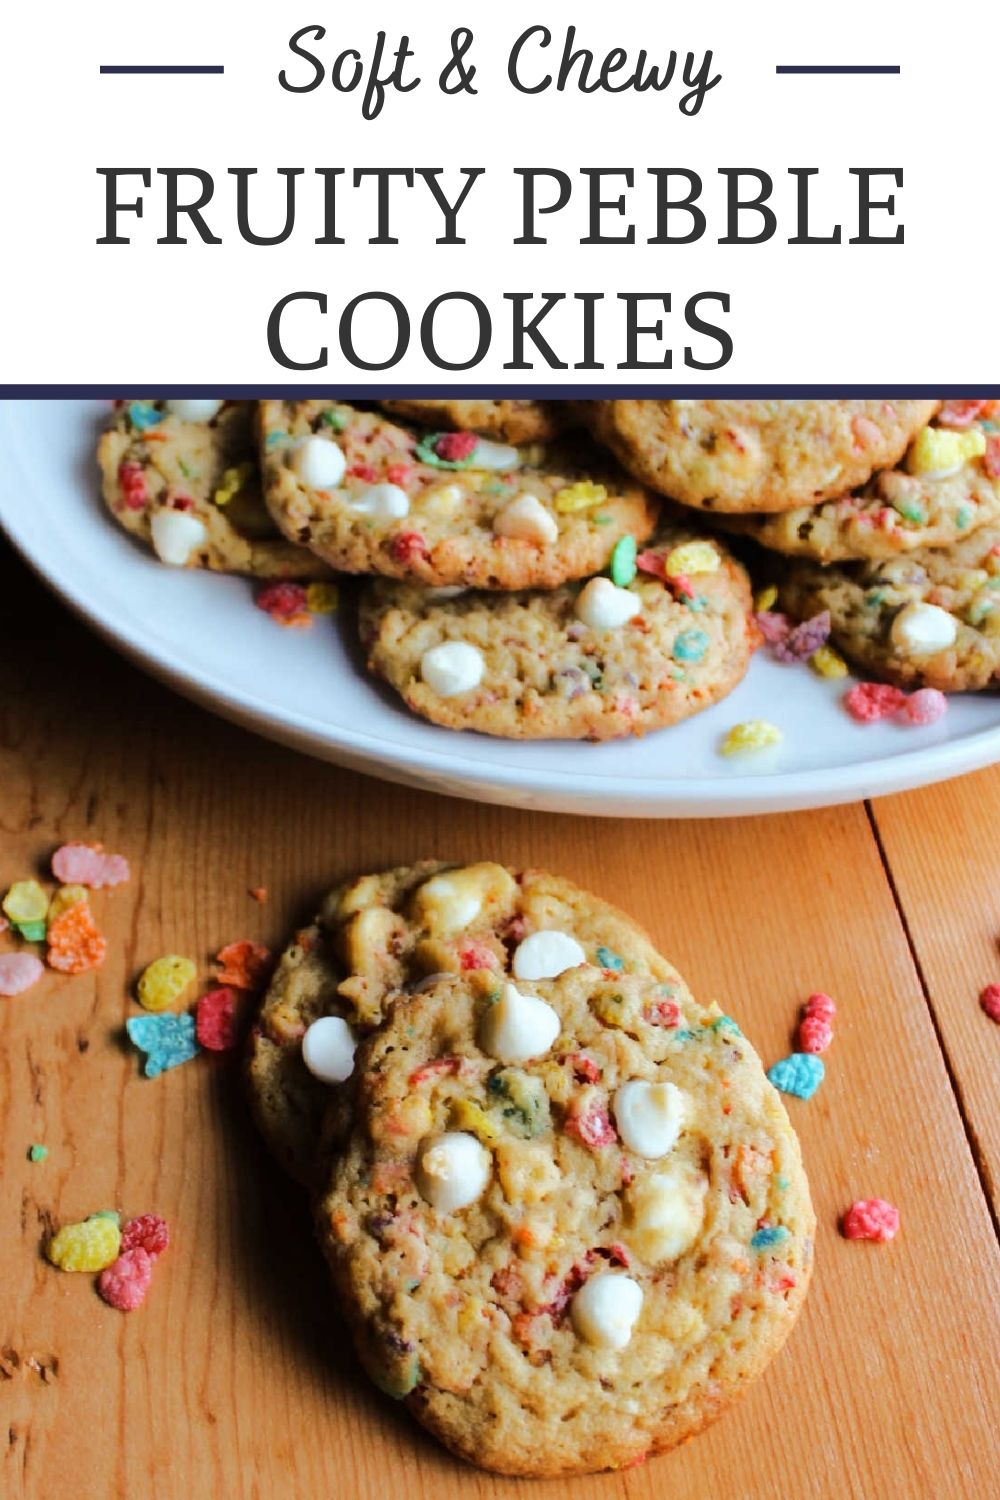 Fruity Pebble cookies are all of the tastiest parts of childhood rolled up into one delicious dessert. They are chewy, crunchy, creamy and fabulous.